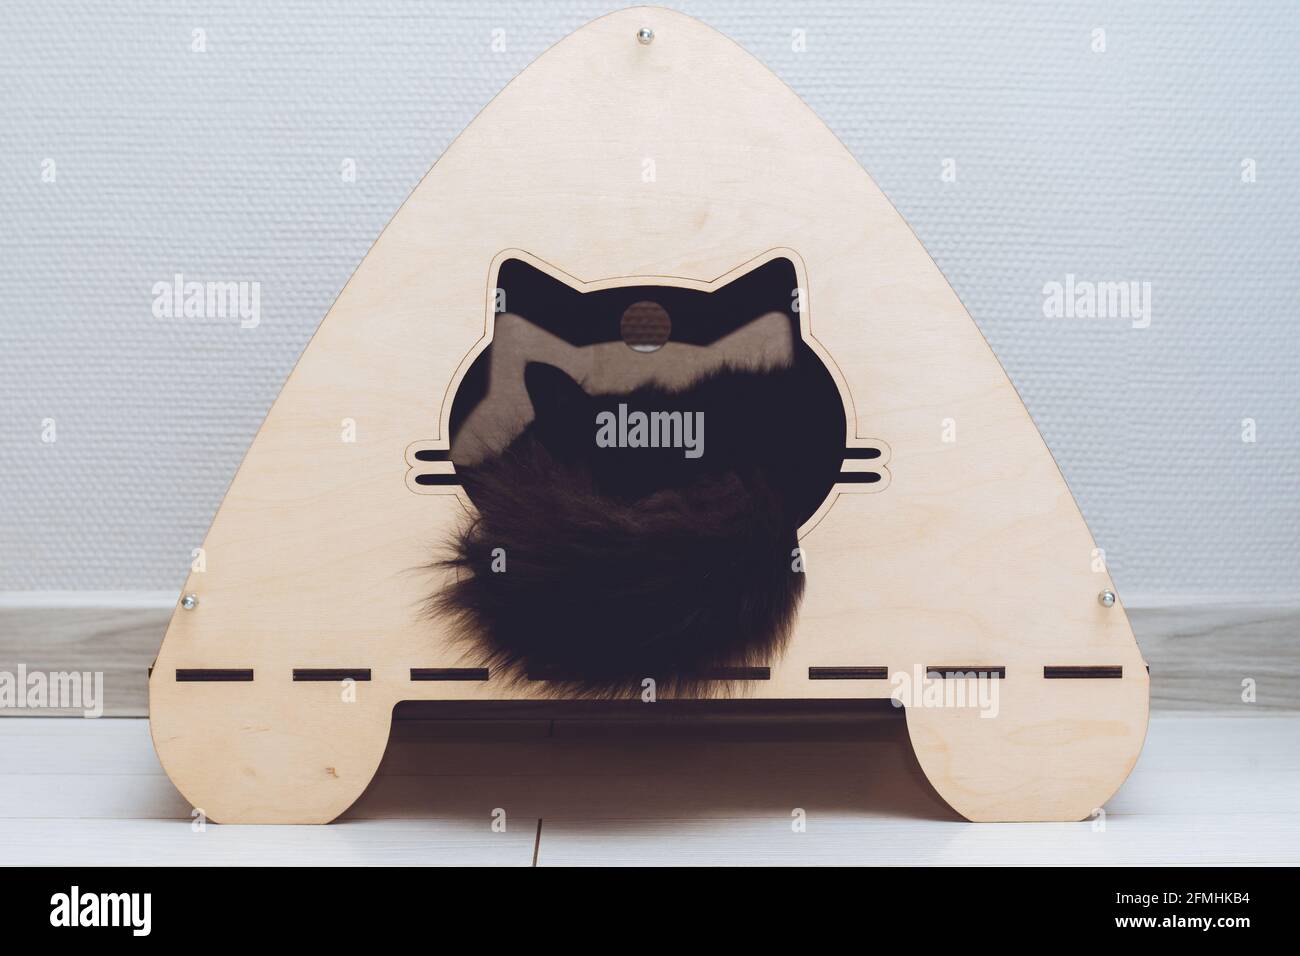 Wooden cat house made of plywood with entrance in form of cat's face, with black cat's tail, sticking out of it Stock Photo